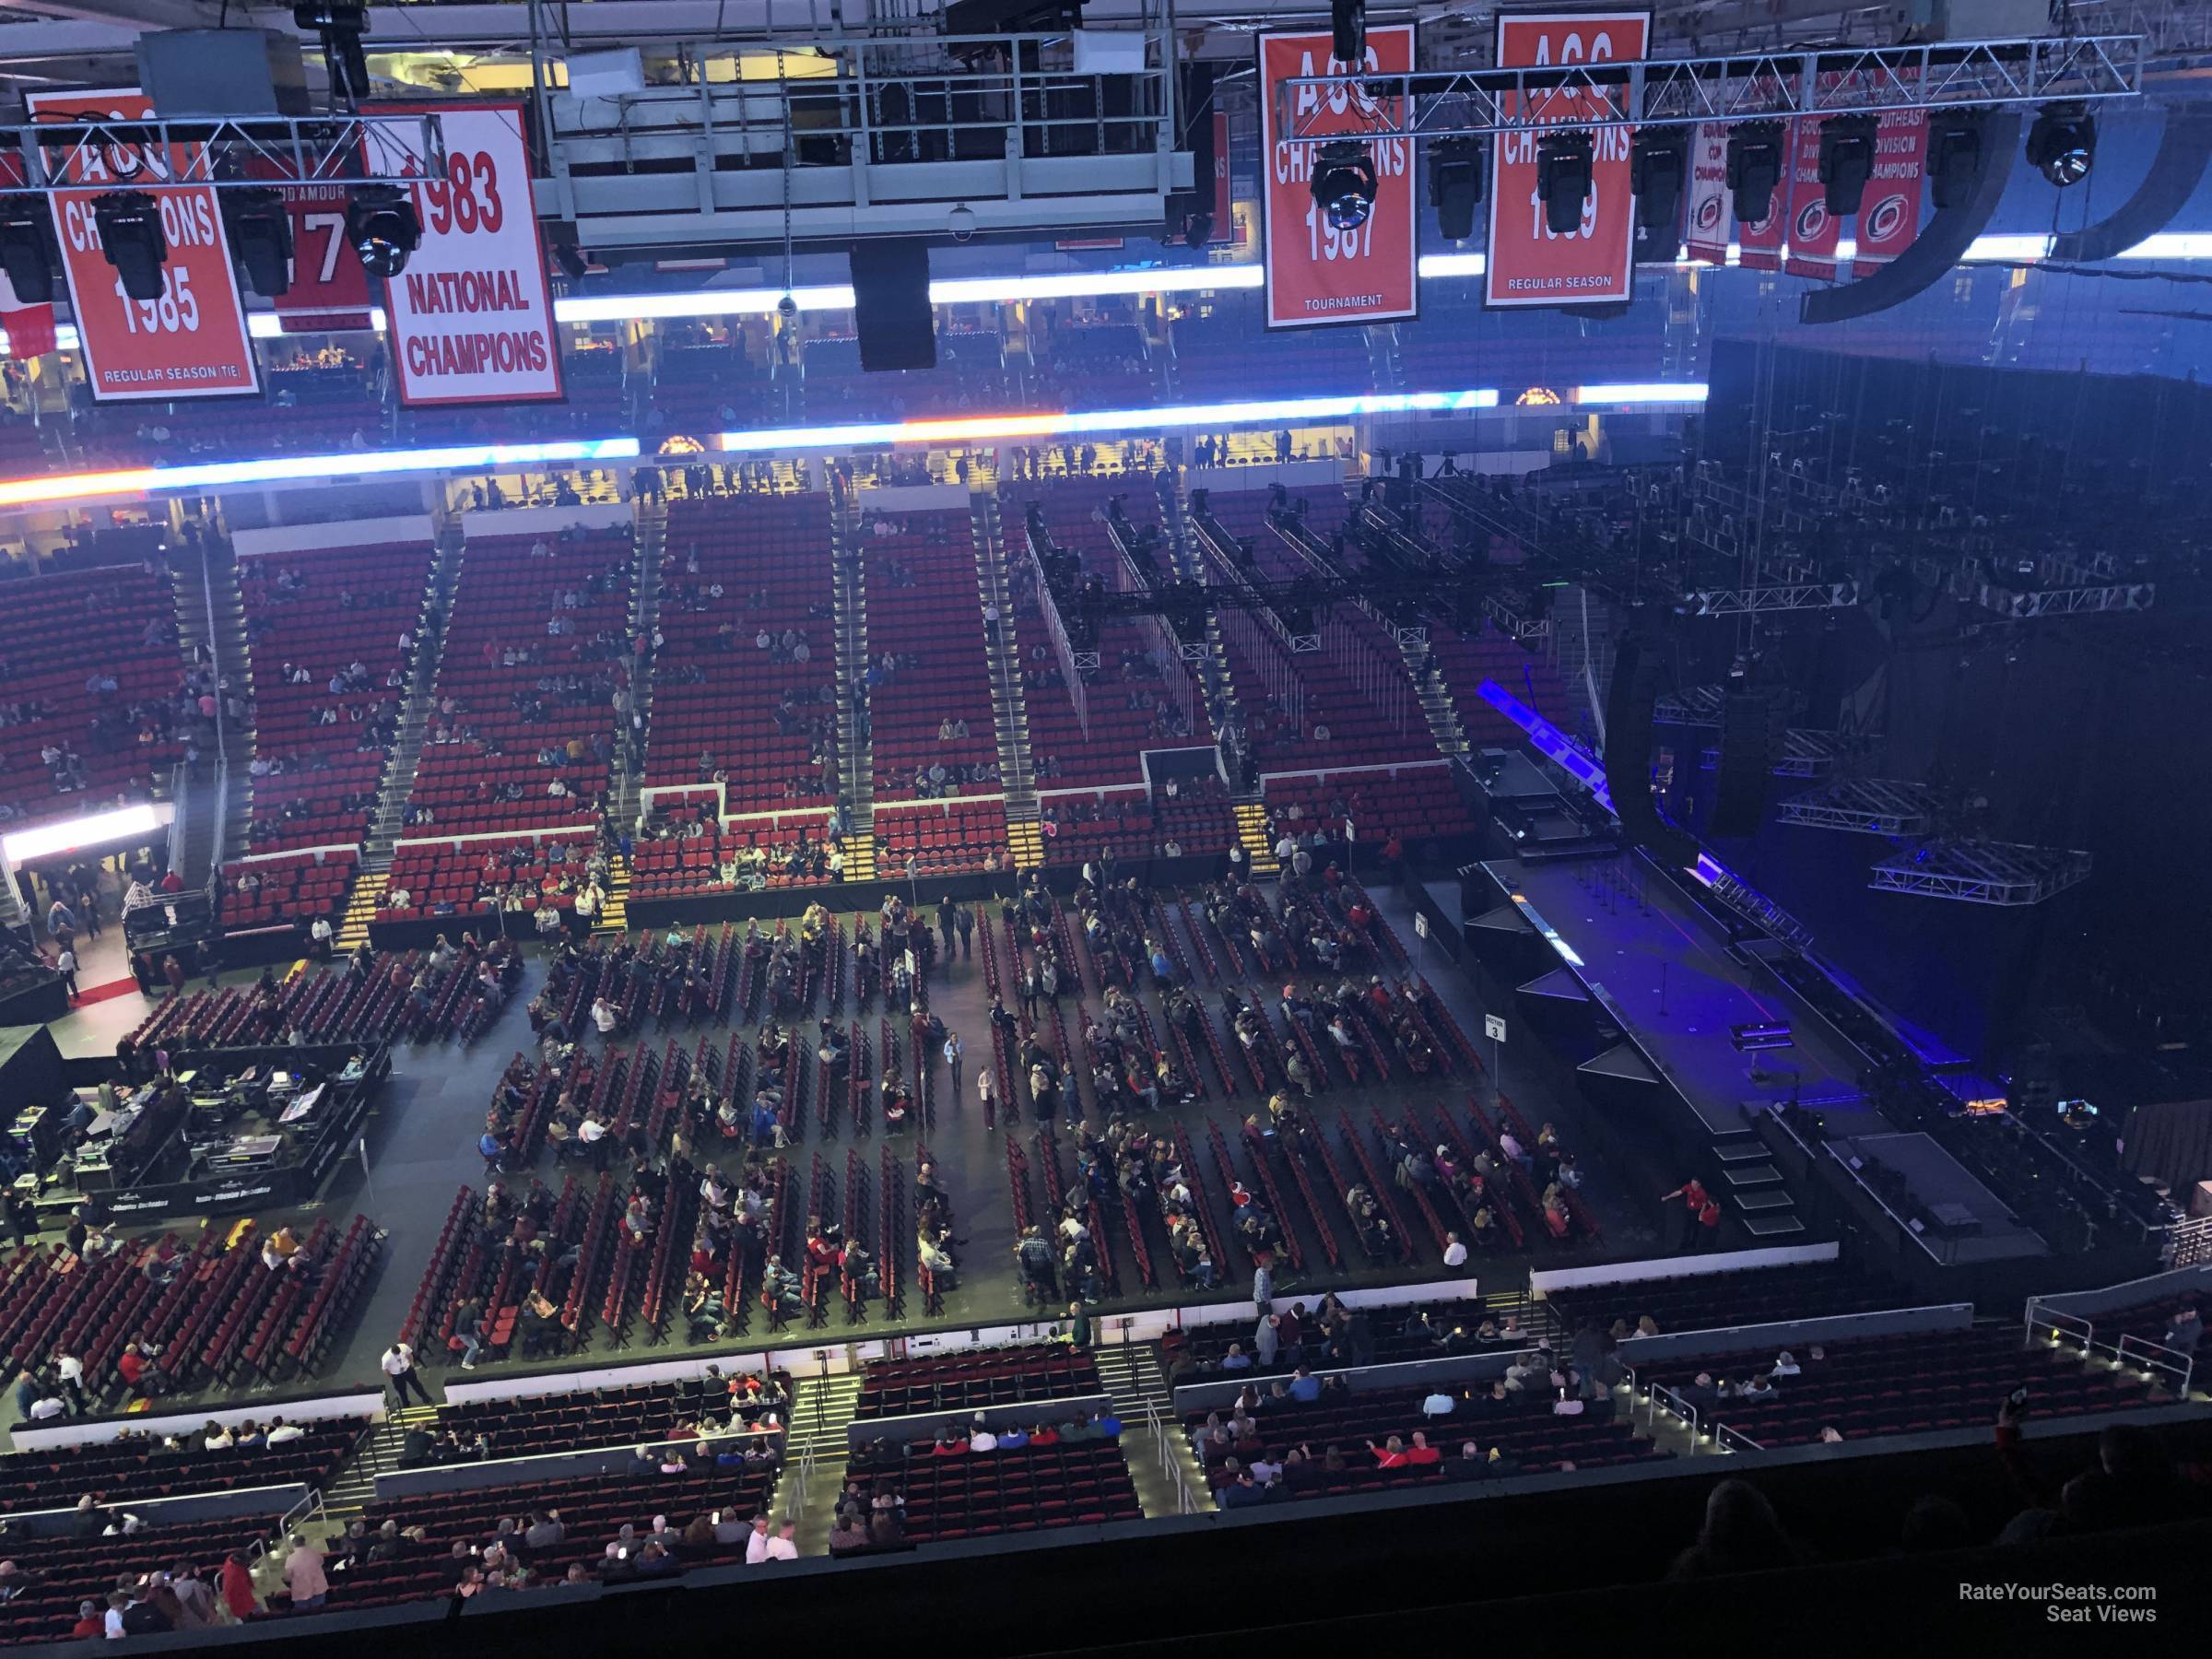 PNC Arena Concert Section 324 Row F On 11 20 2019 FL 